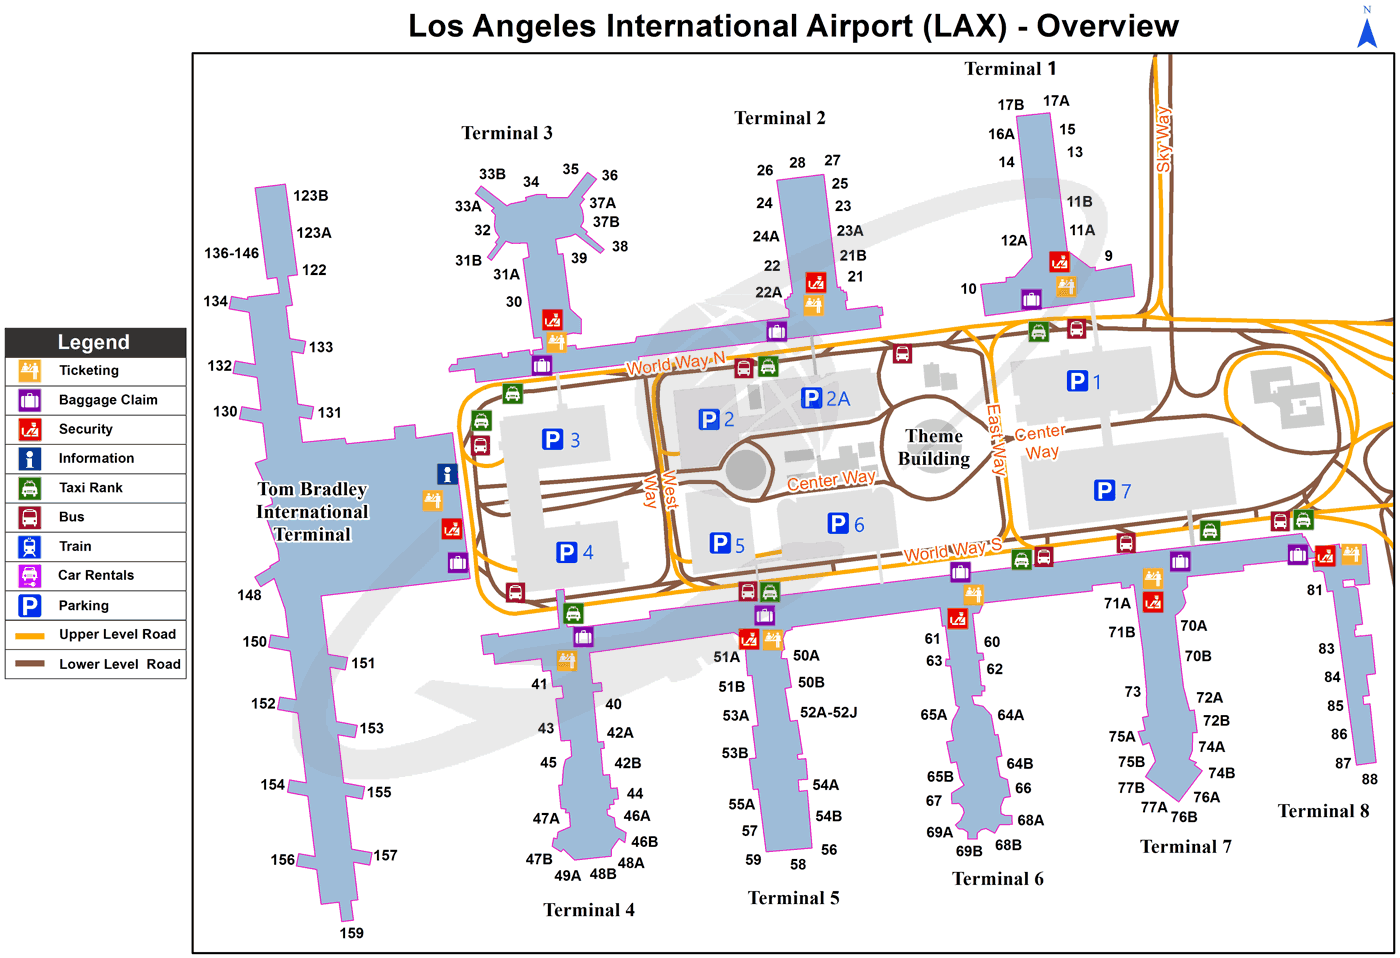 LAX_overview_map